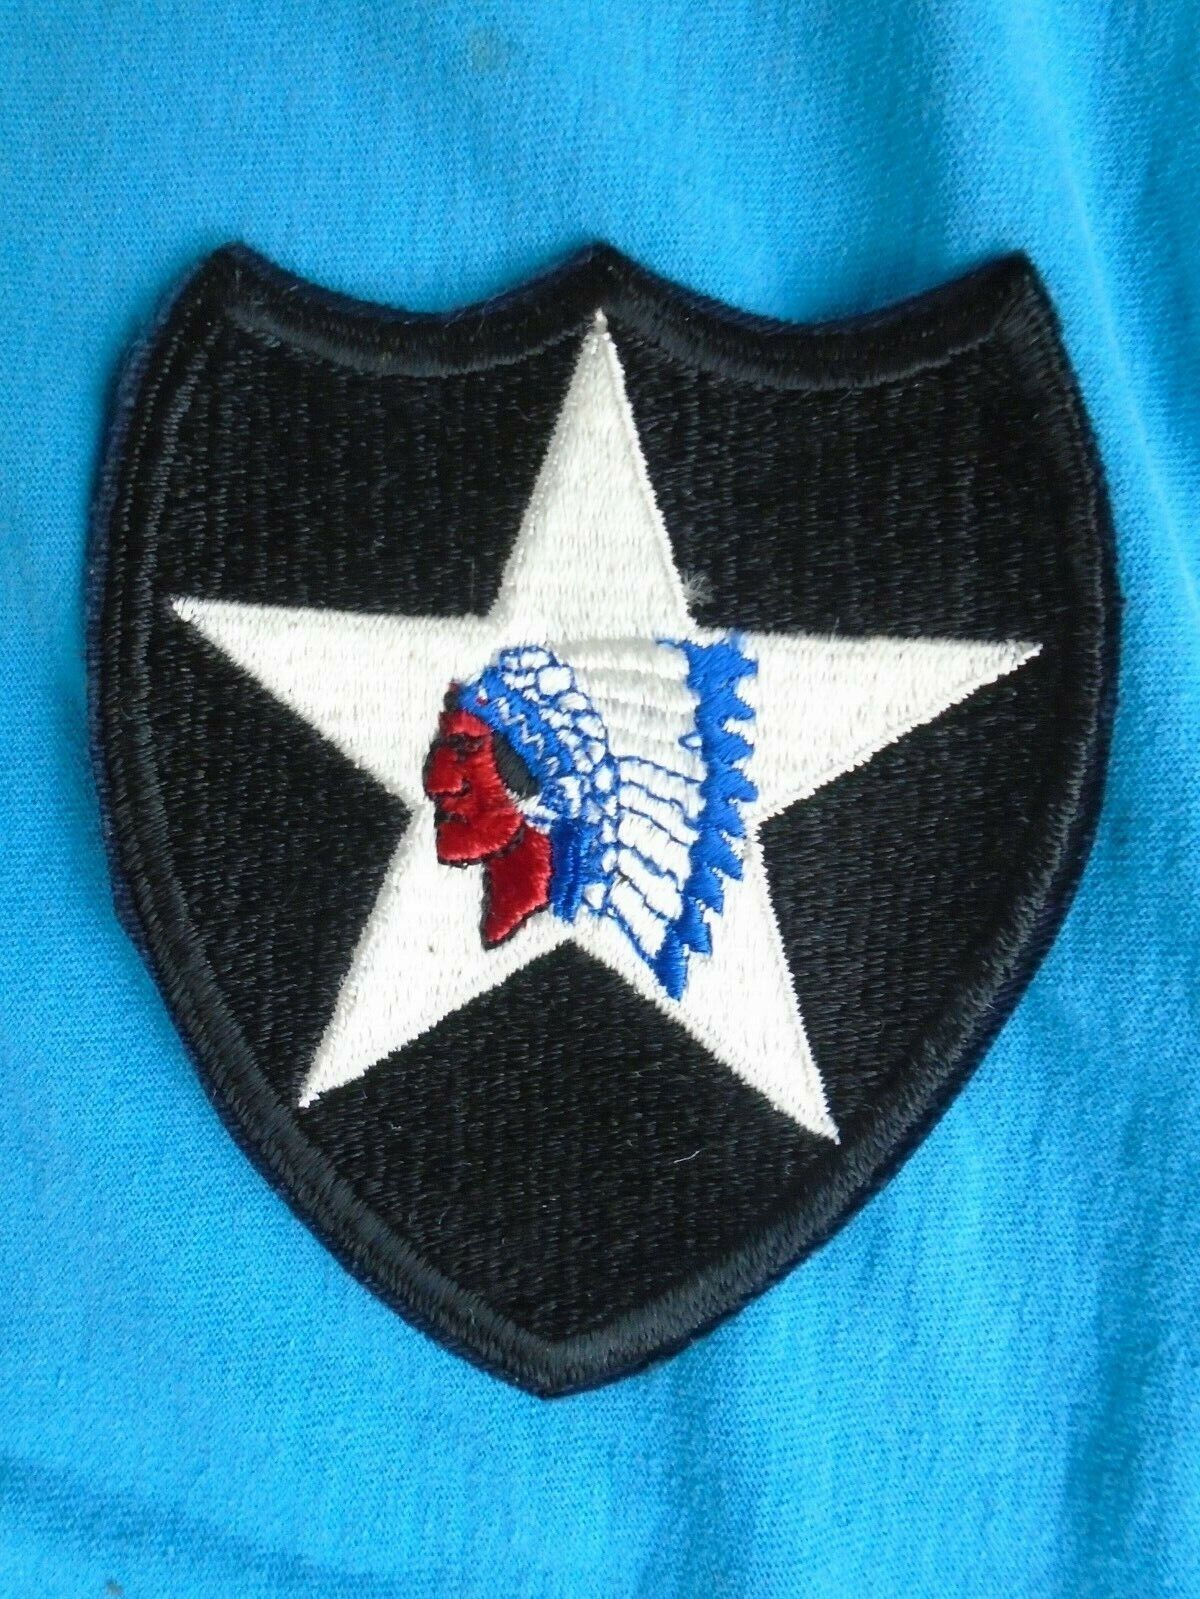 US Army 2nd division patch